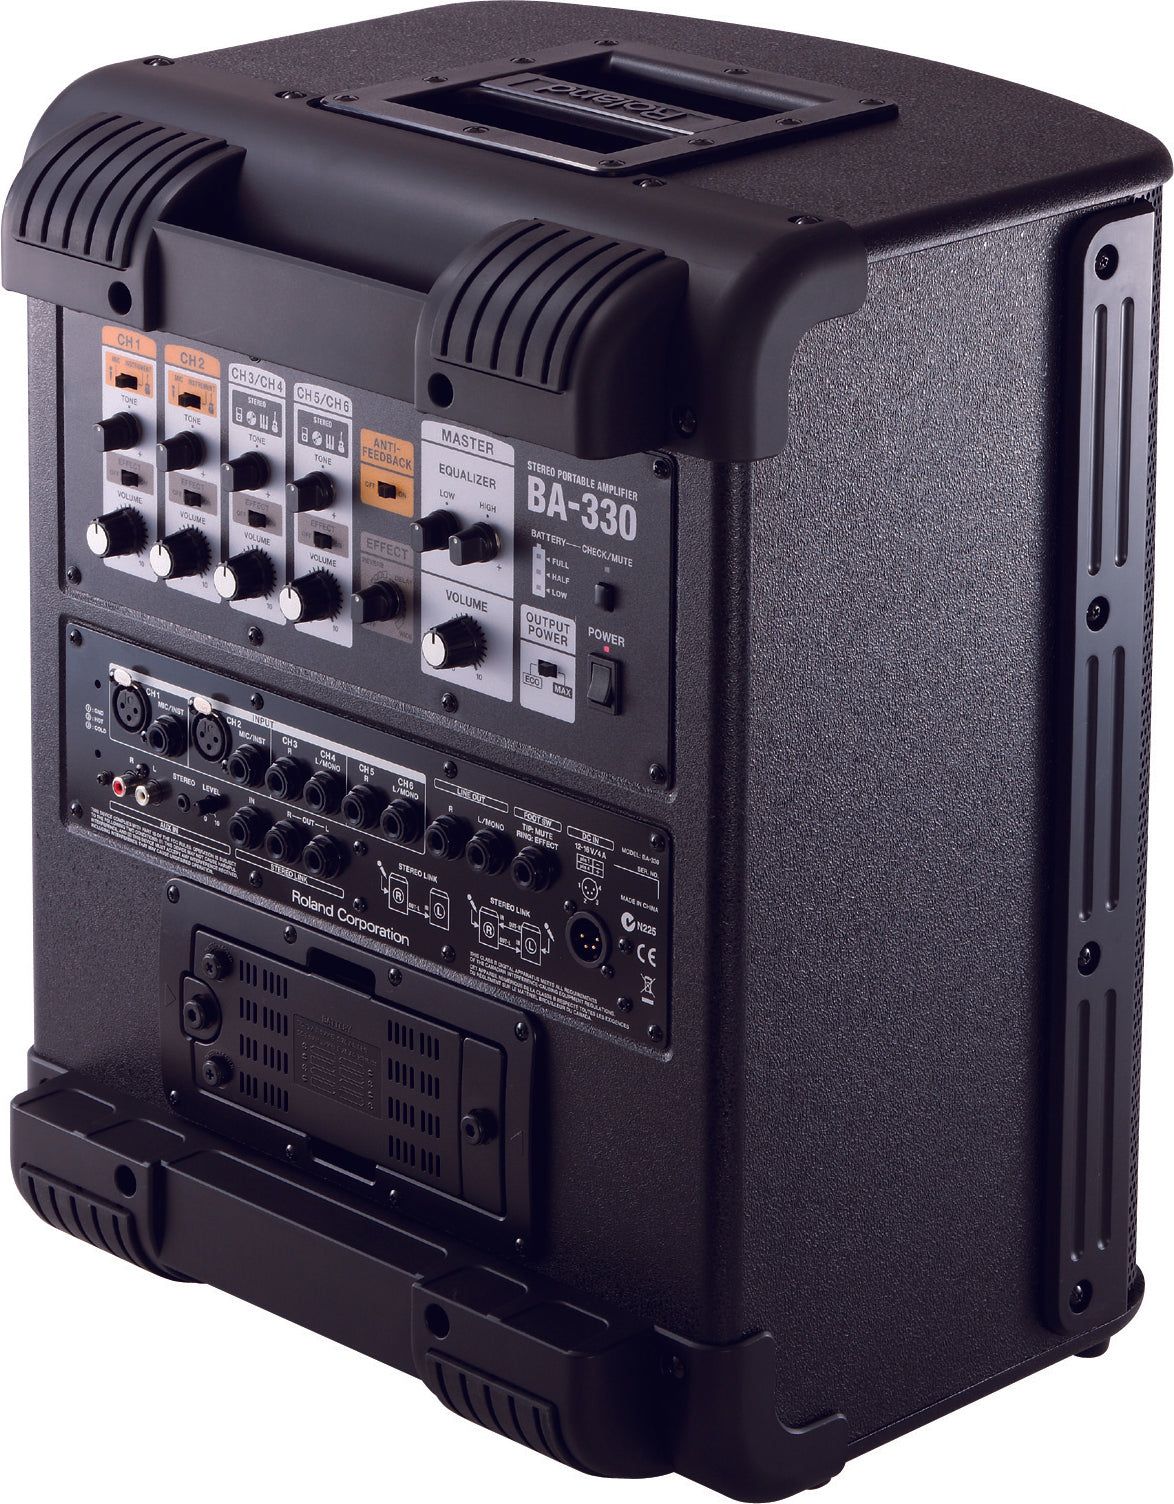 Roland BA-330 Battery Powered Portable PA System